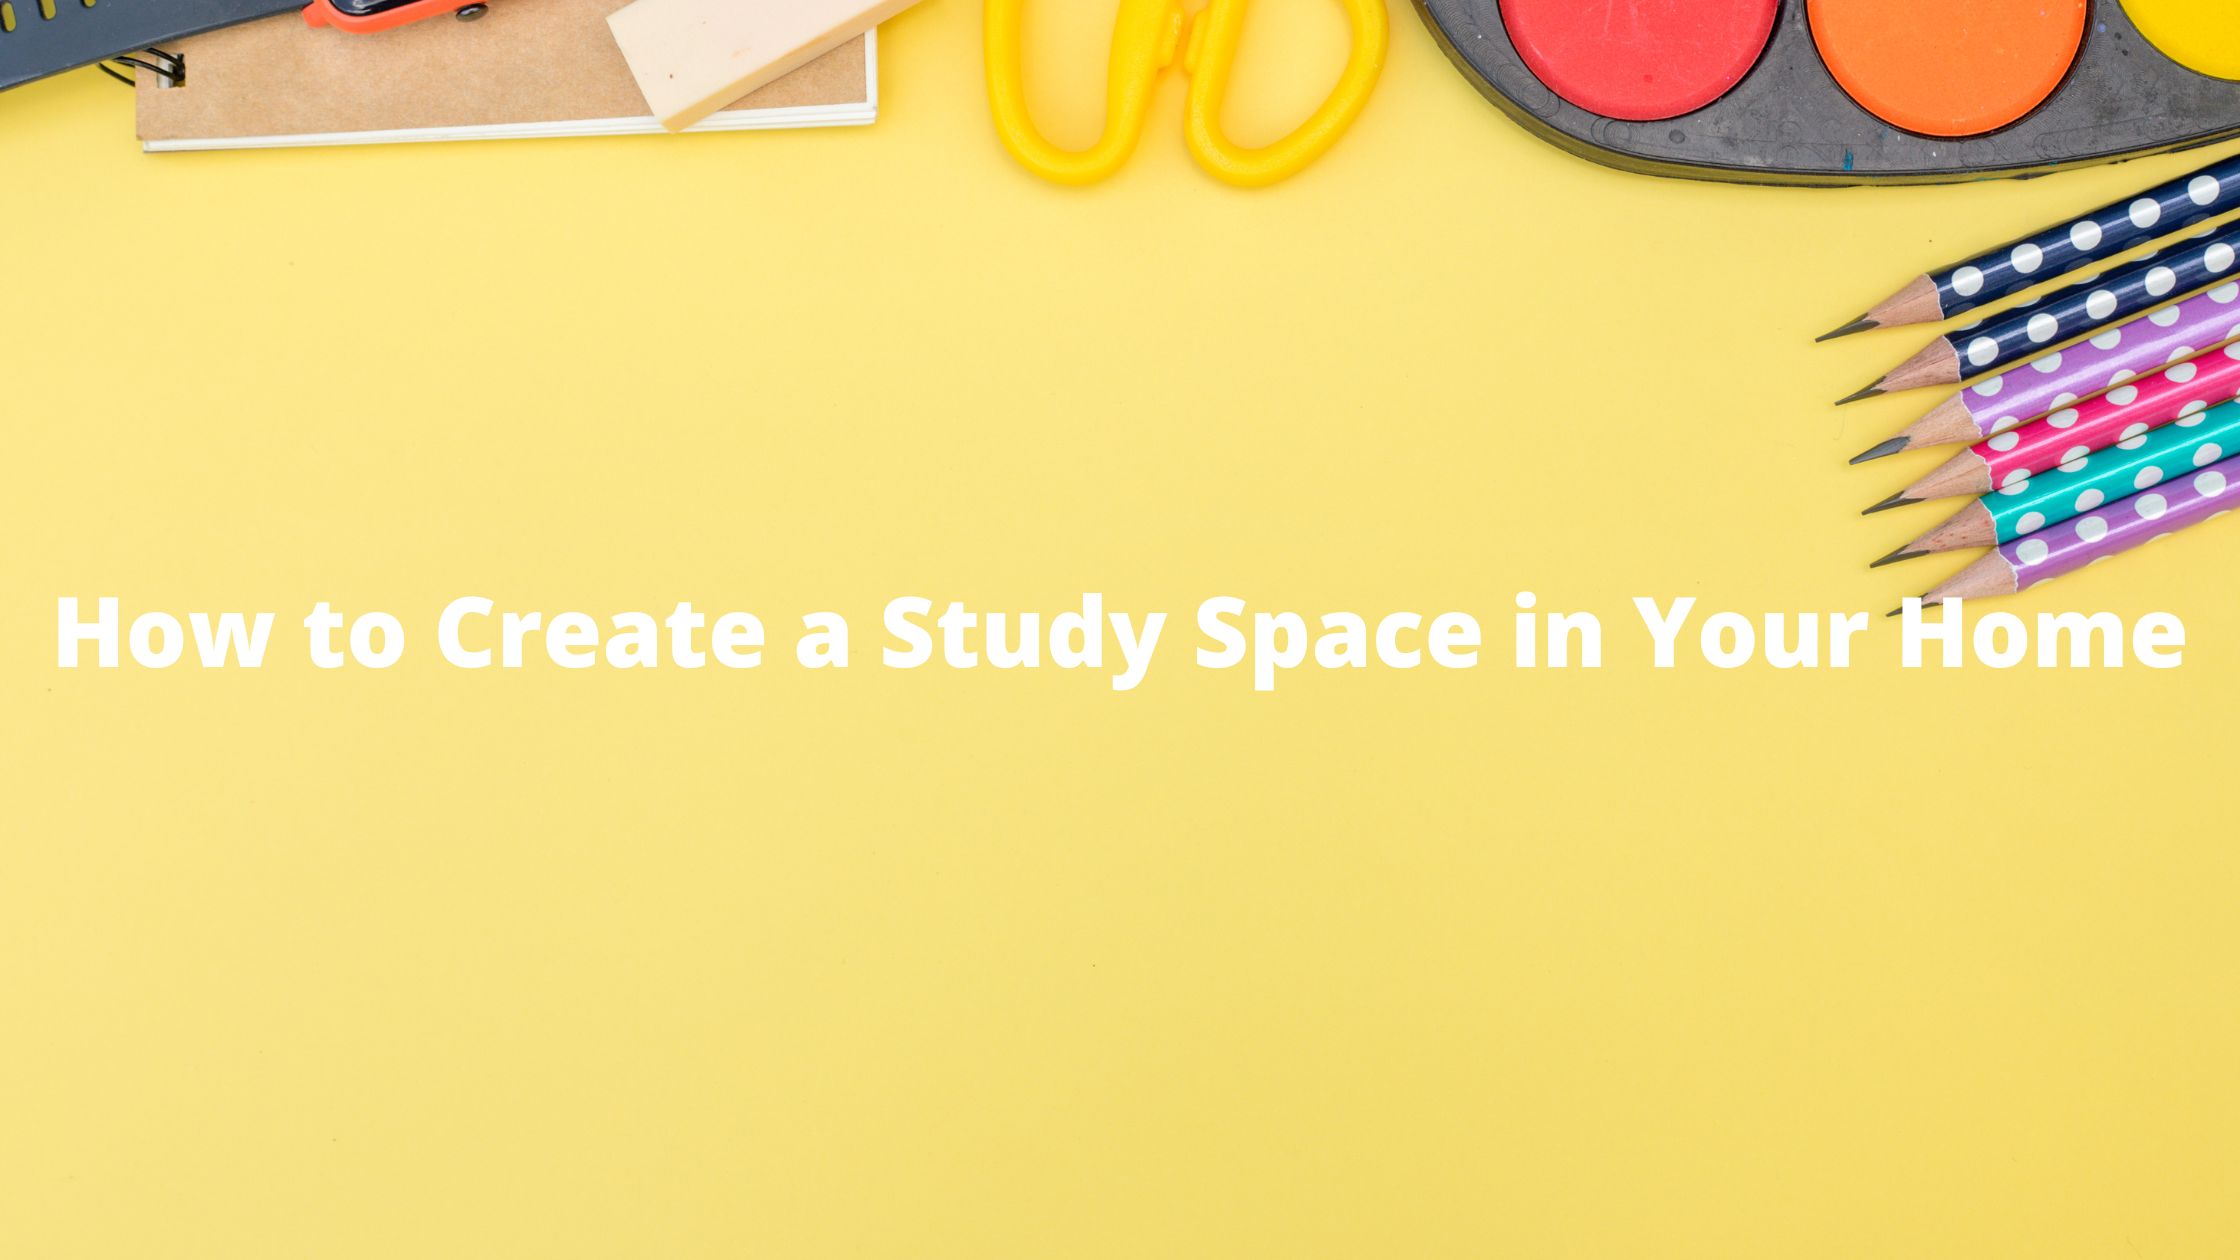 How to Create a Study Space in Your Home